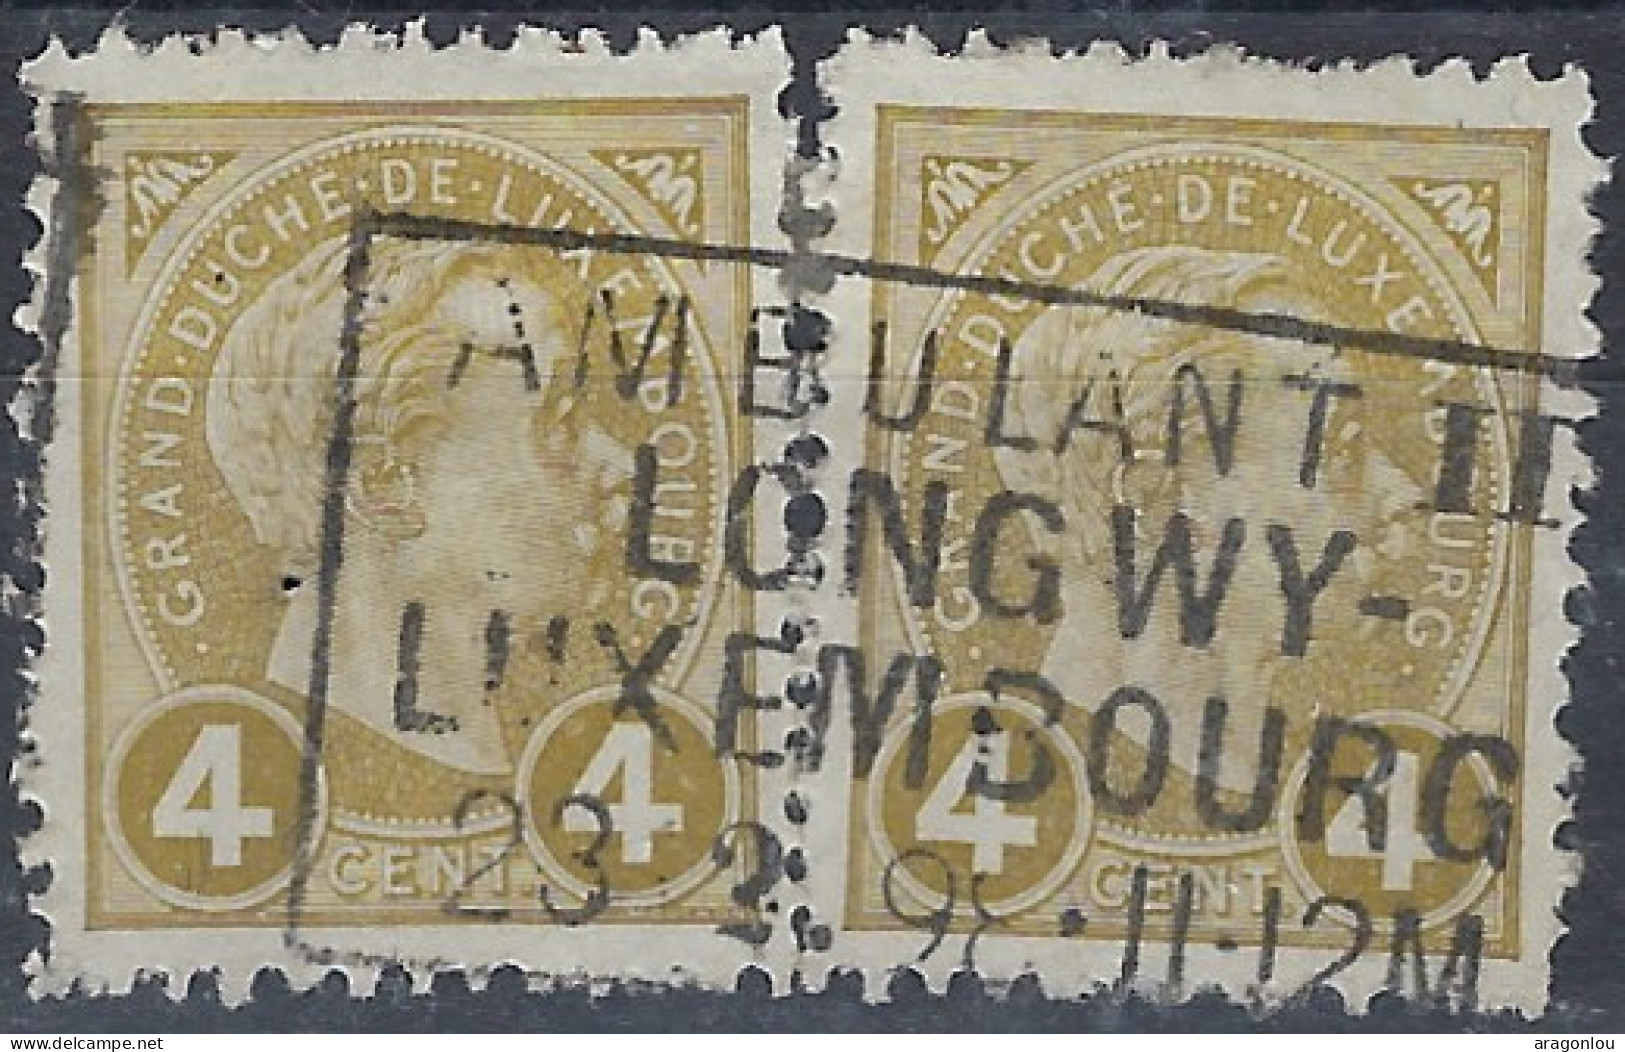 Luxembourg - Luxemburg - Timbres - Adolphe  -  Cachet  Ambulant  -  Longwy - Luxembourg   Paire   ° - 1895 Adolphe Rechterzijde